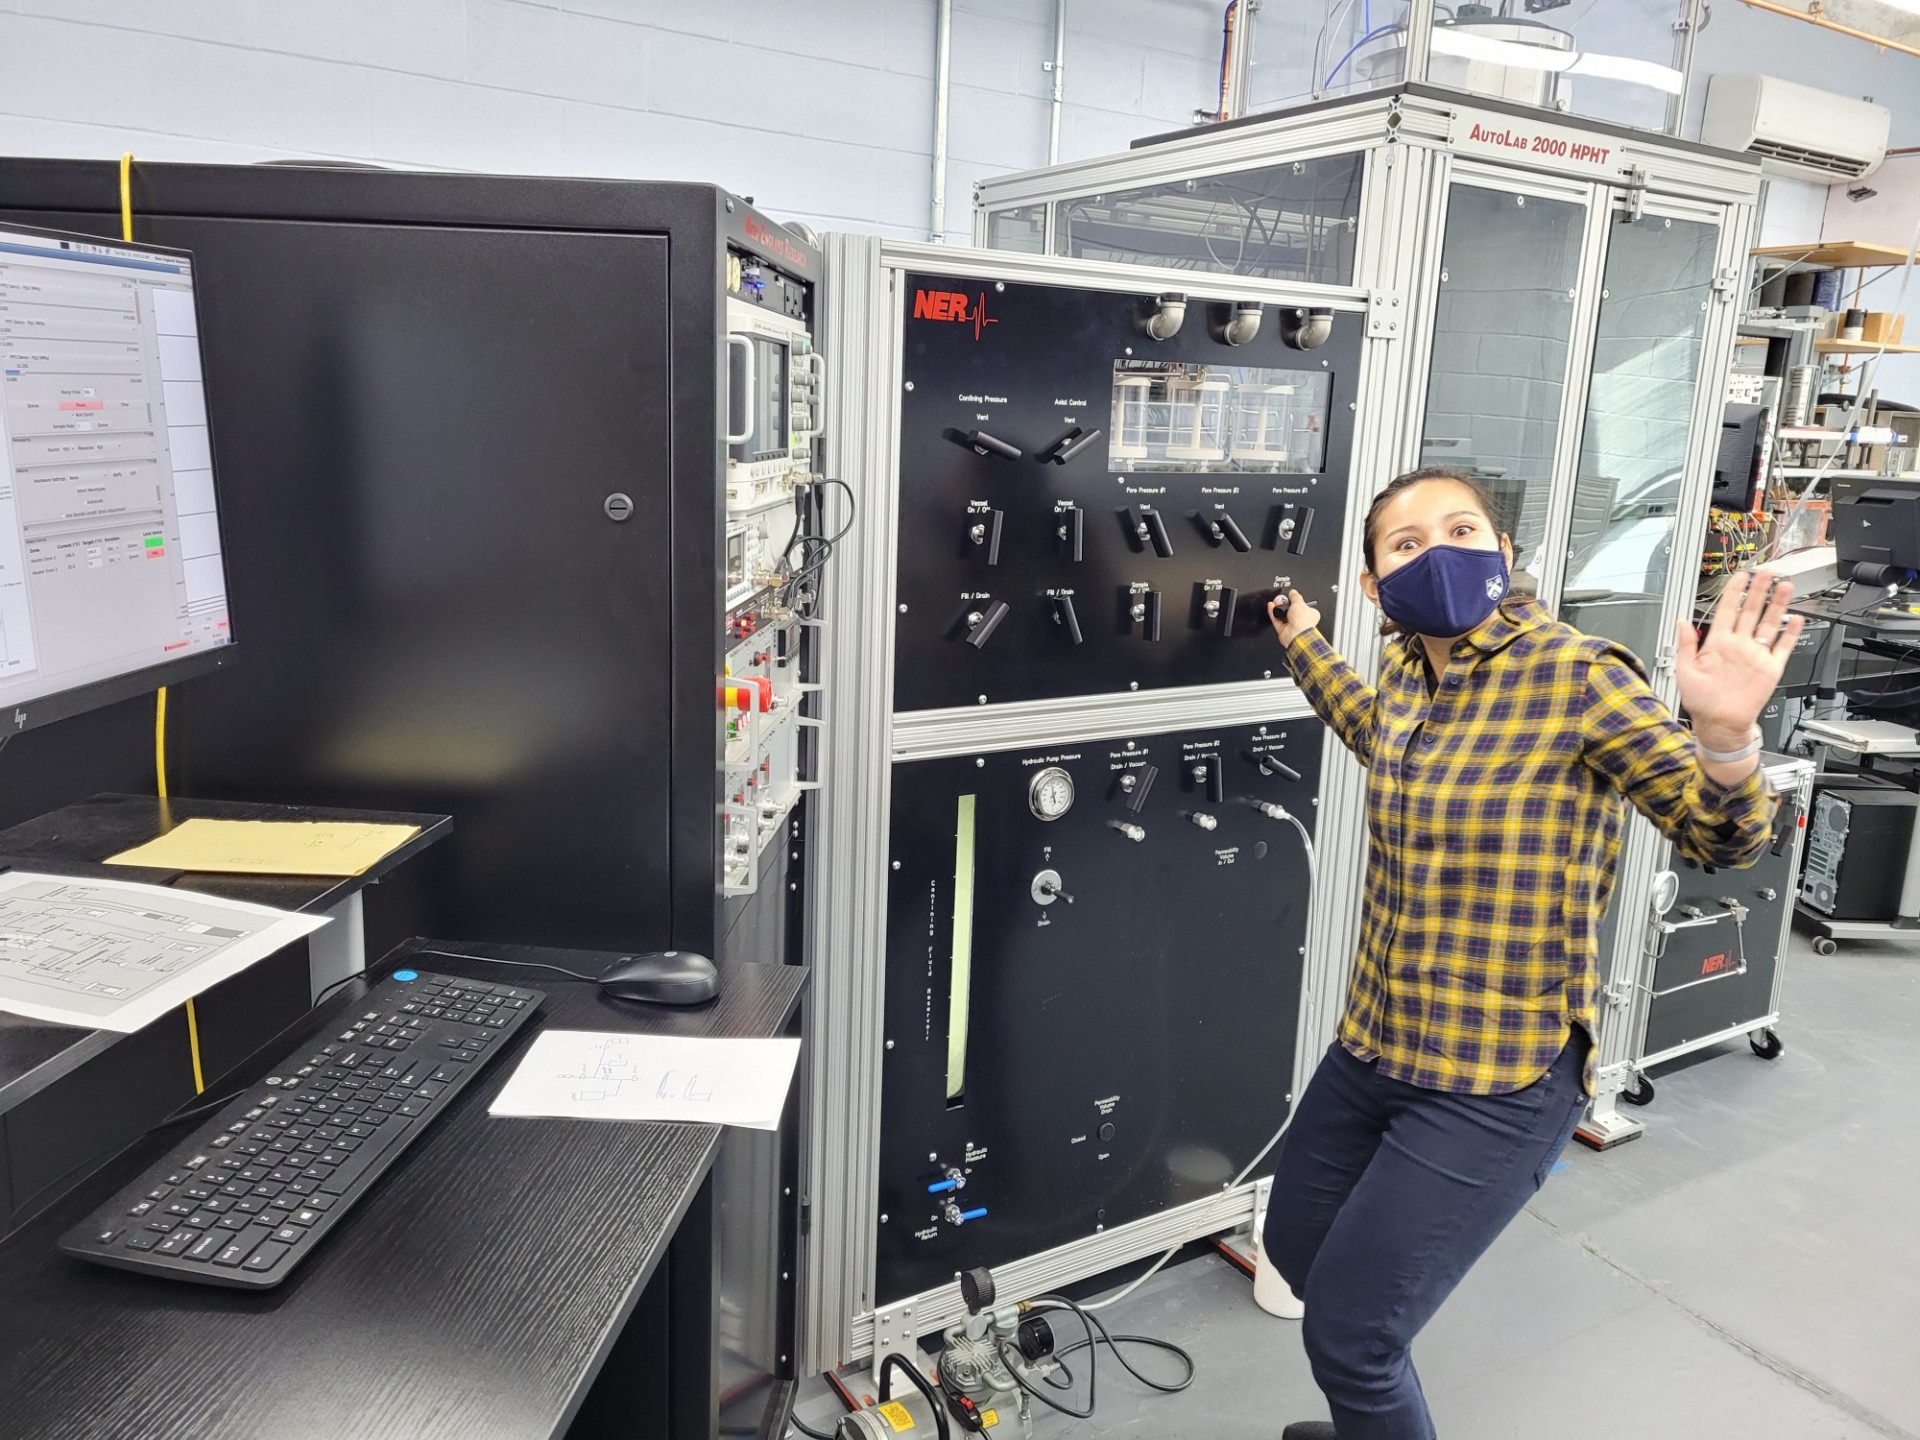 Catalina Sanchez-Roa shows off our exciting new toy: the hi T, hi P apparatus from NER (2021).